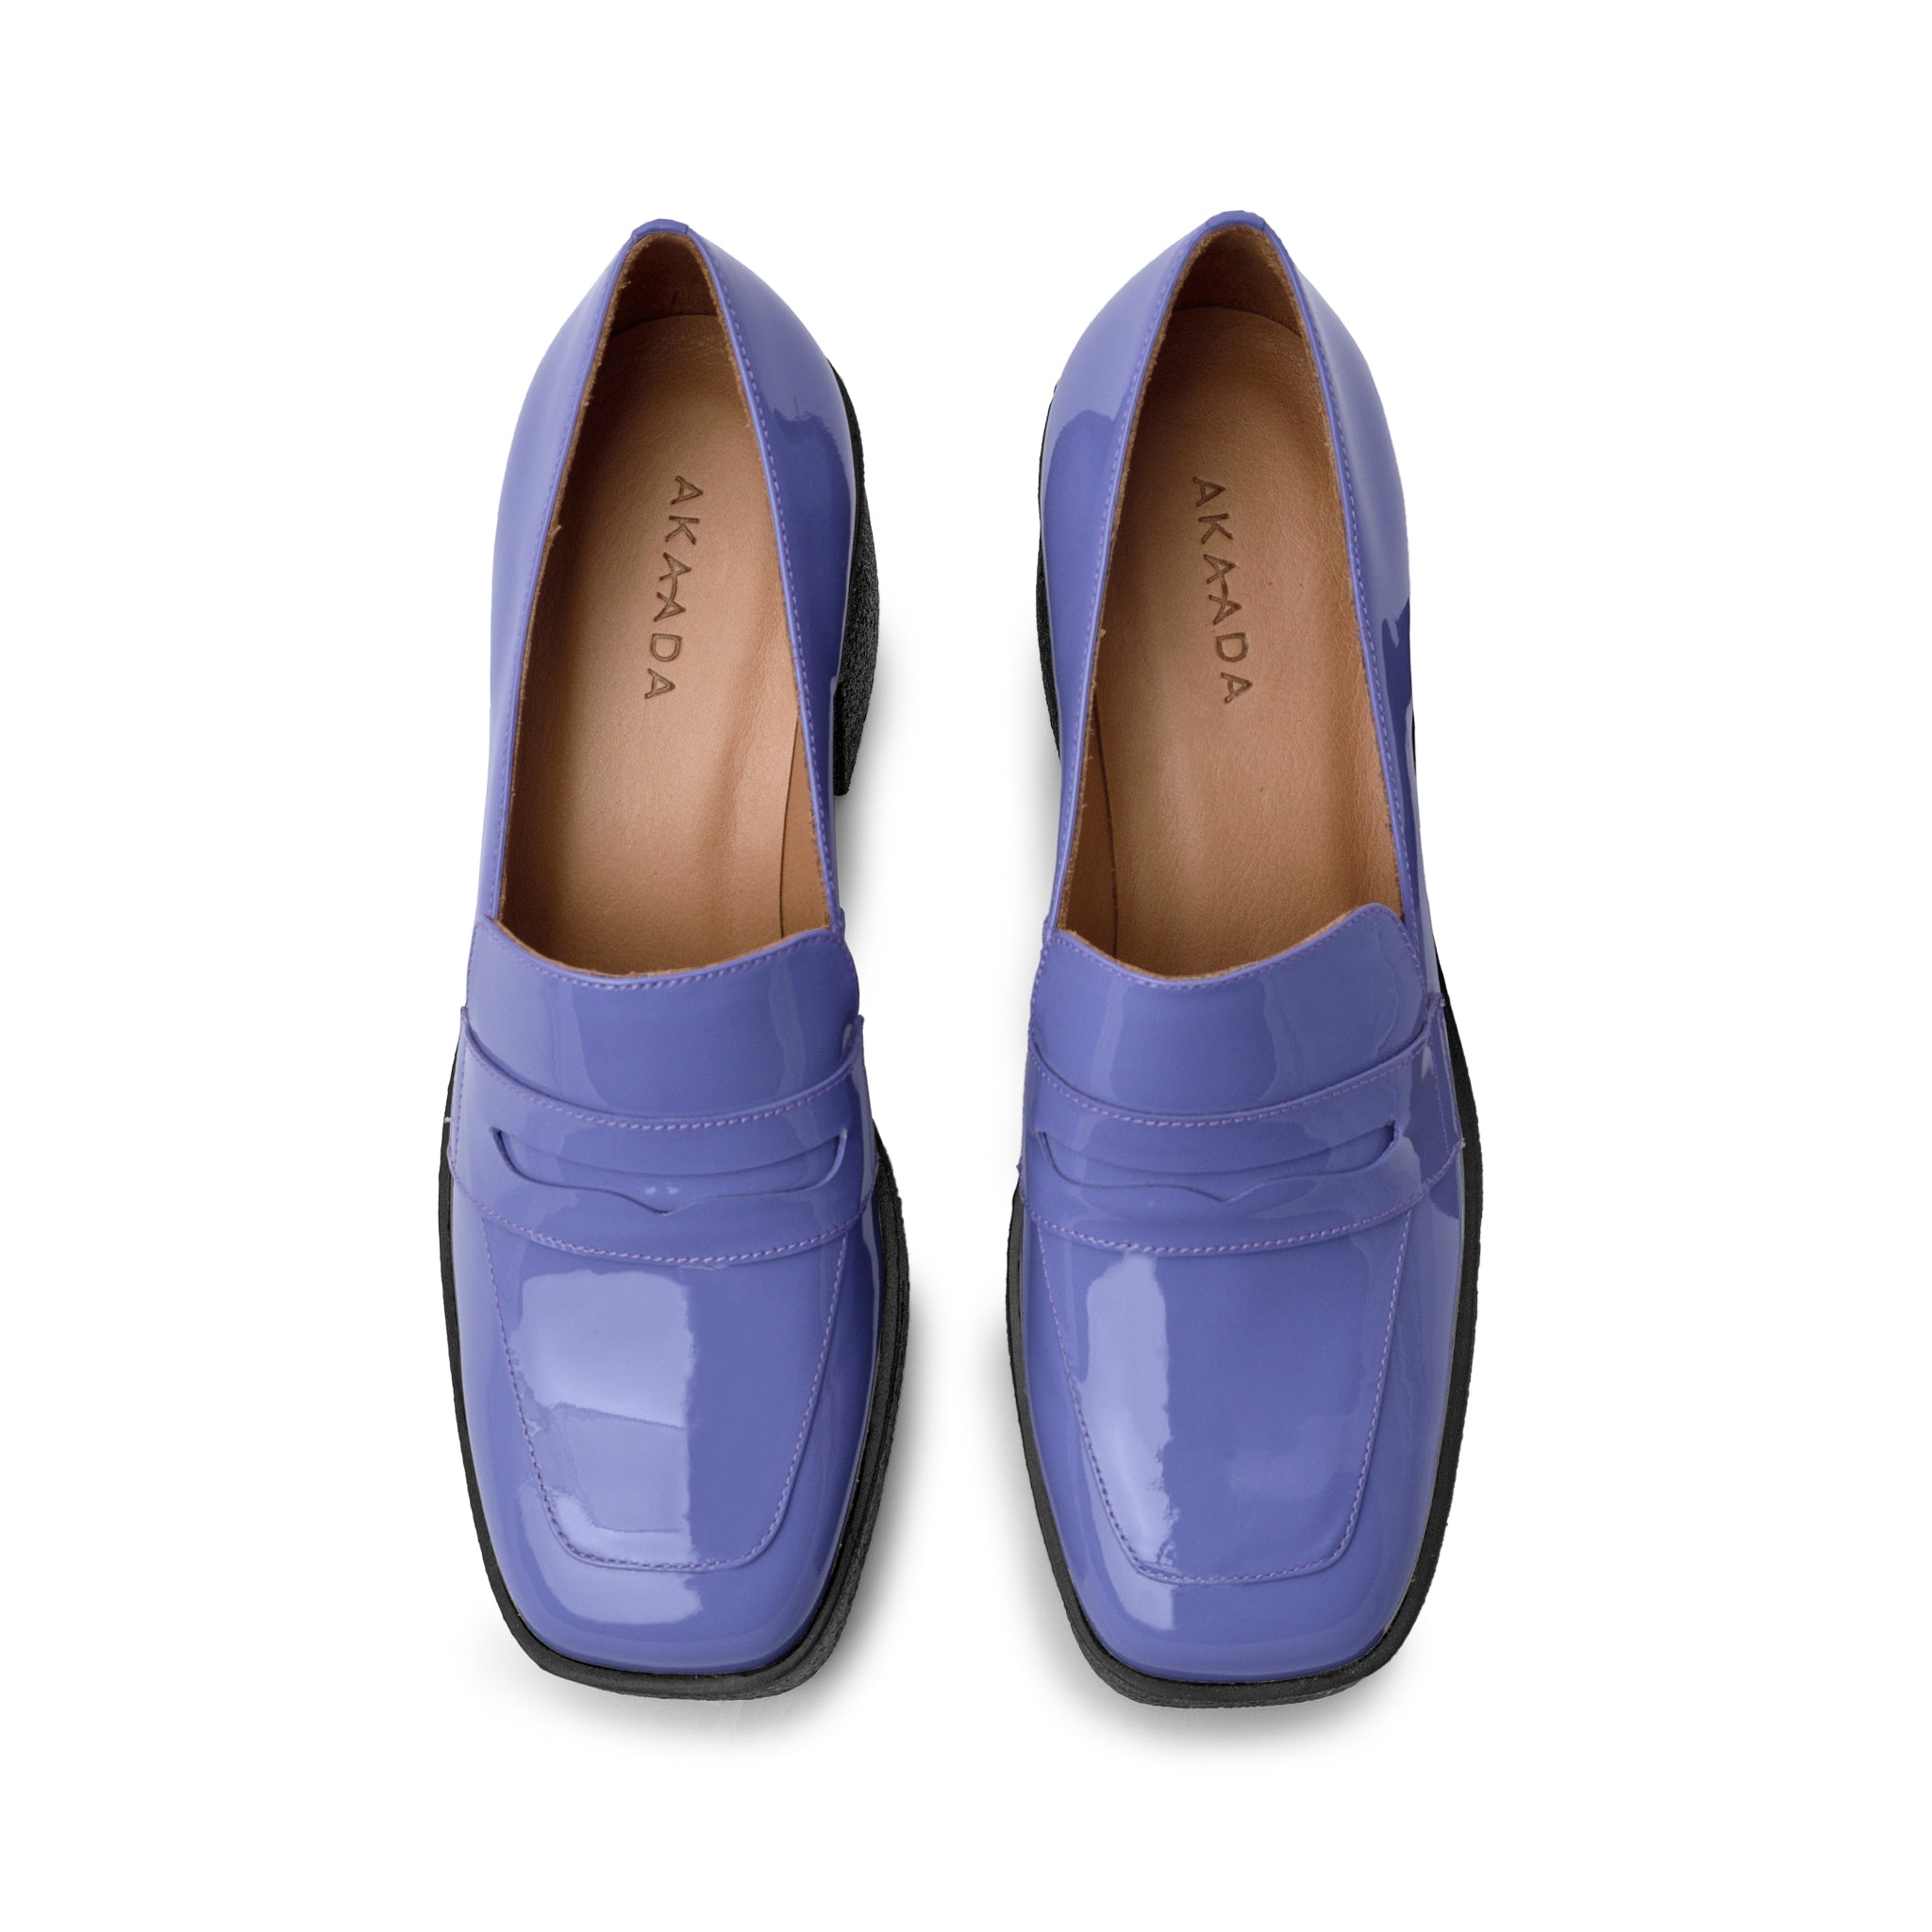 Yoko Lilac Patent Leather Chunky Loafers 21031-01-04 -9